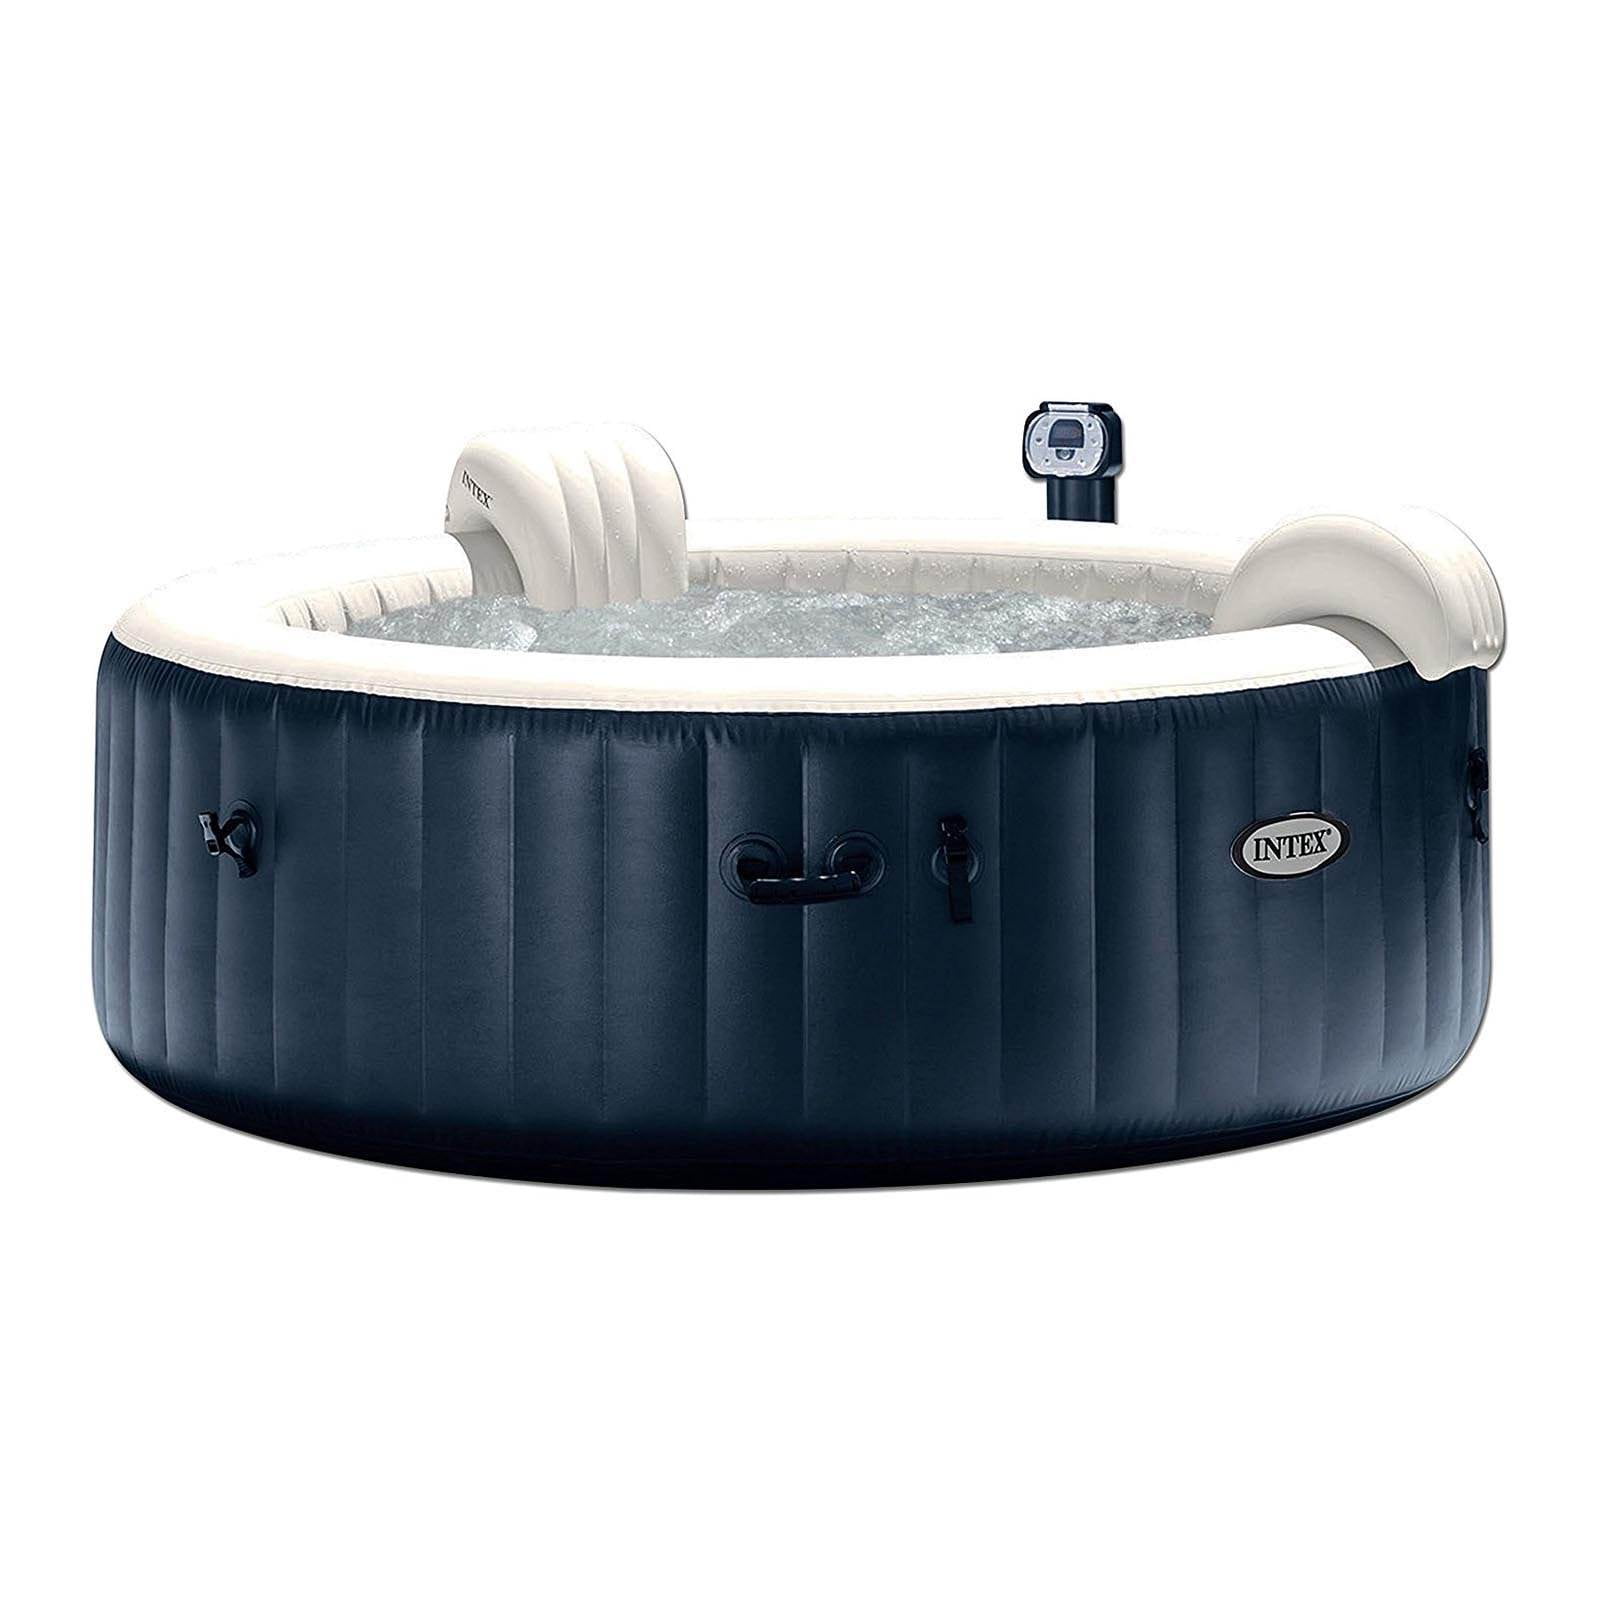 Magnetisk inflation rive ned Intex PureSpa Inflatable Bubble Jets 6 Person Hot Tub and Battery LED Light  - Walmart.com